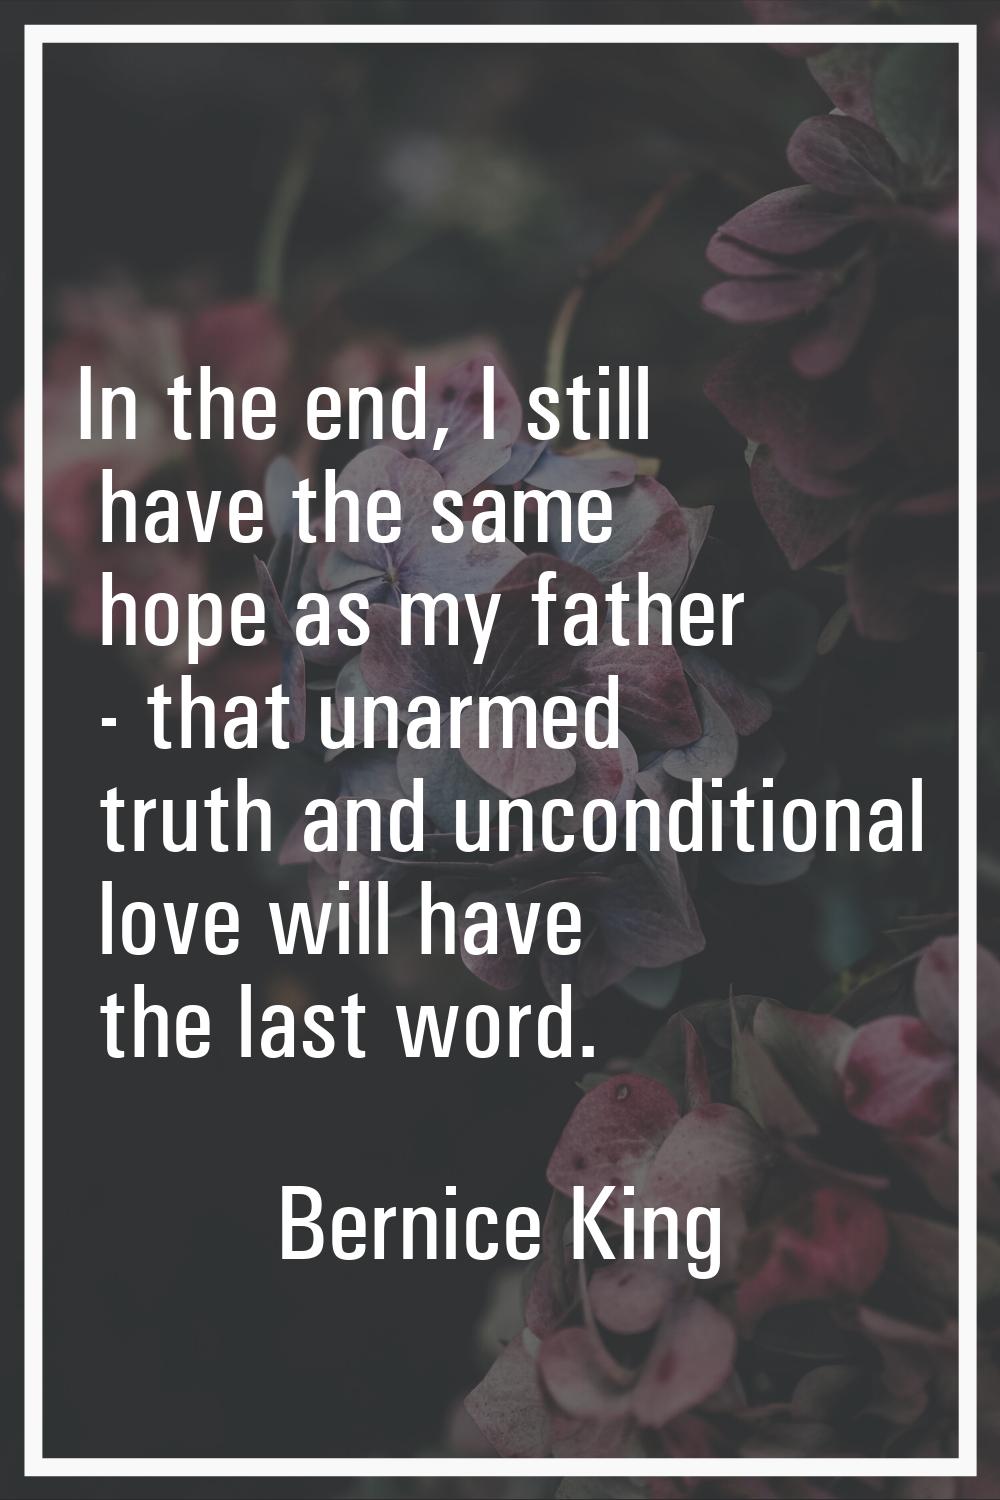 In the end, I still have the same hope as my father - that unarmed truth and unconditional love wil